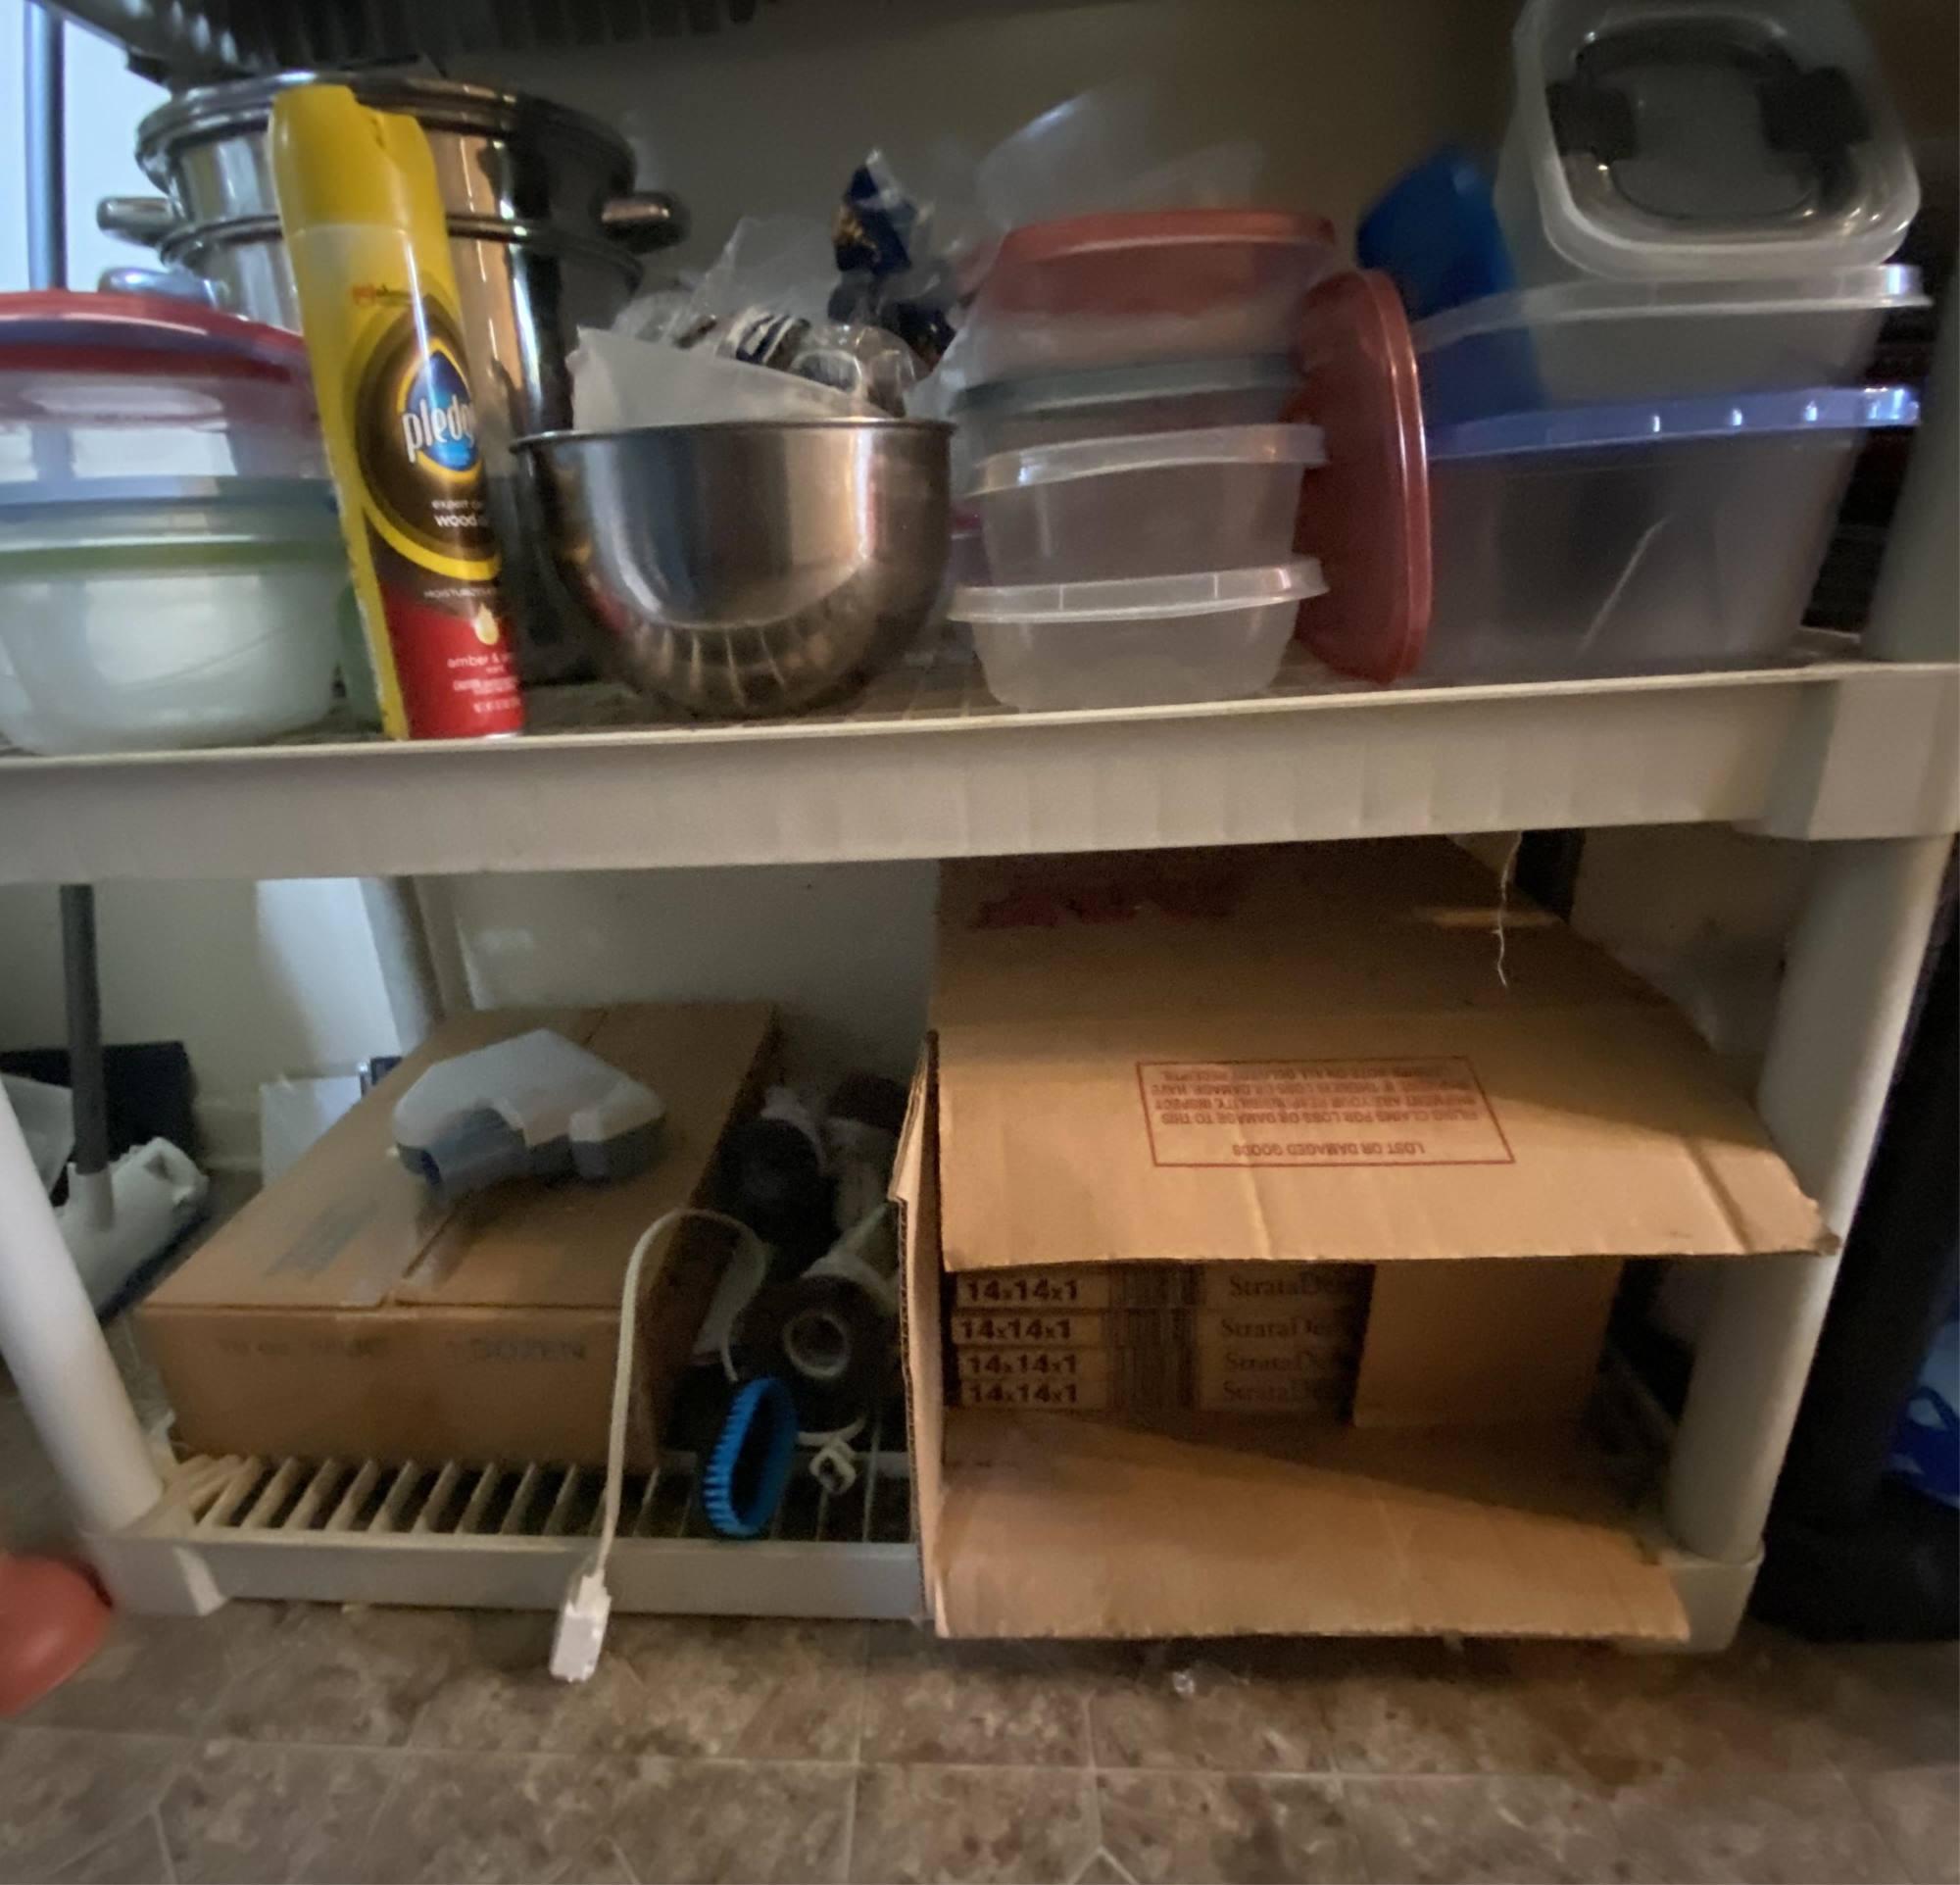 UTILITY SHELVES AND CONTENTS